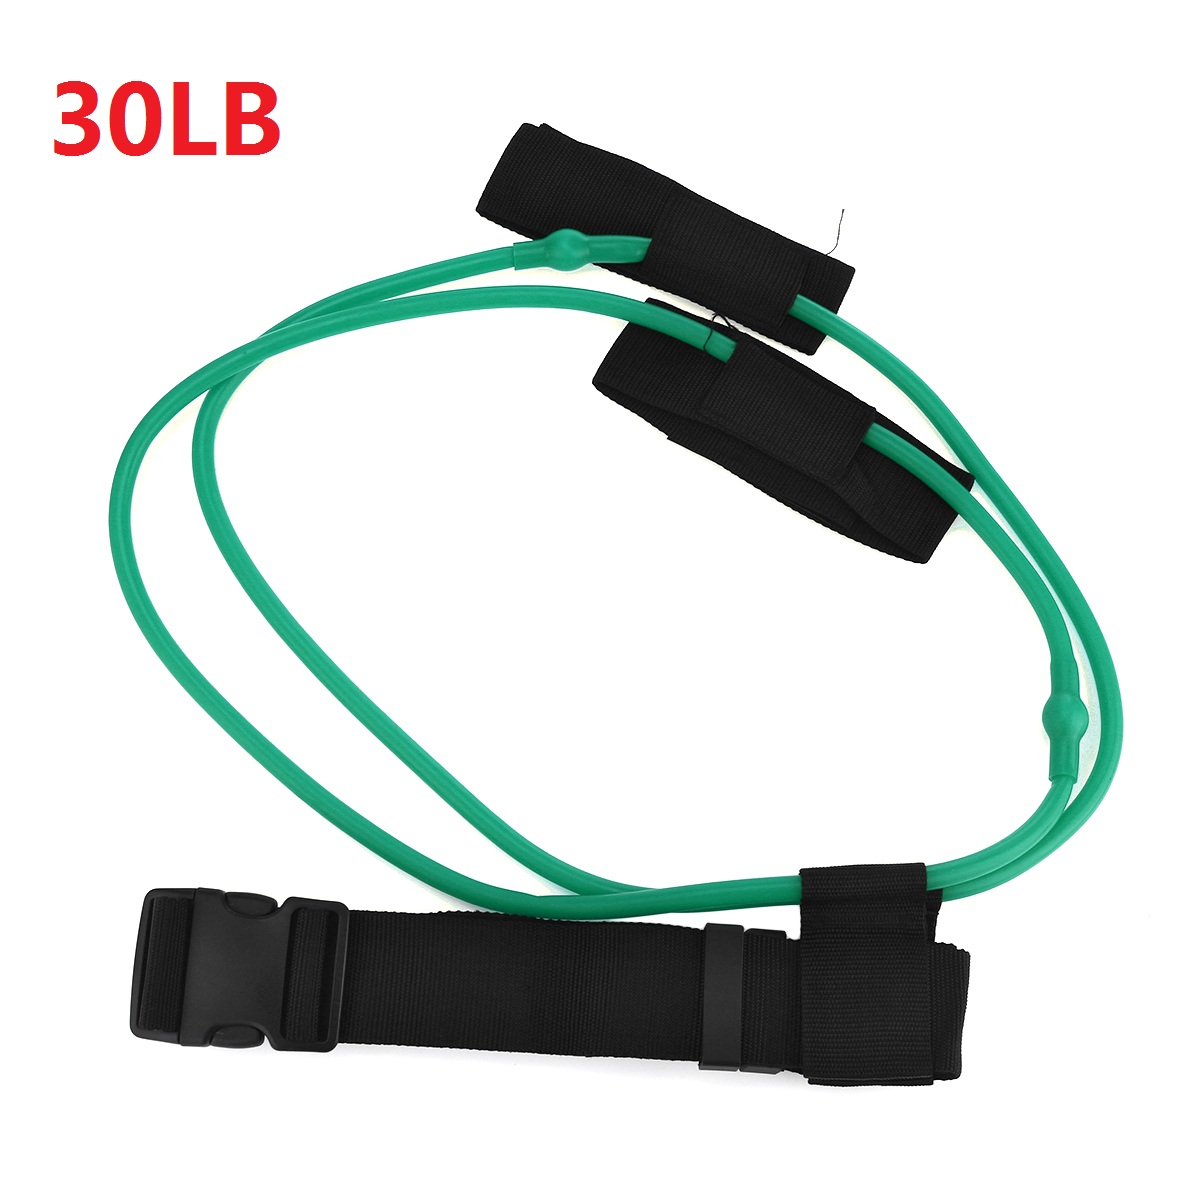 10-40lbs-Pedal-Resistance-Band-Women-Hip-Trainer-Belt-Band-Gum-Workout-Fitness-Bands-Body-Glute-Musc-1697334-8